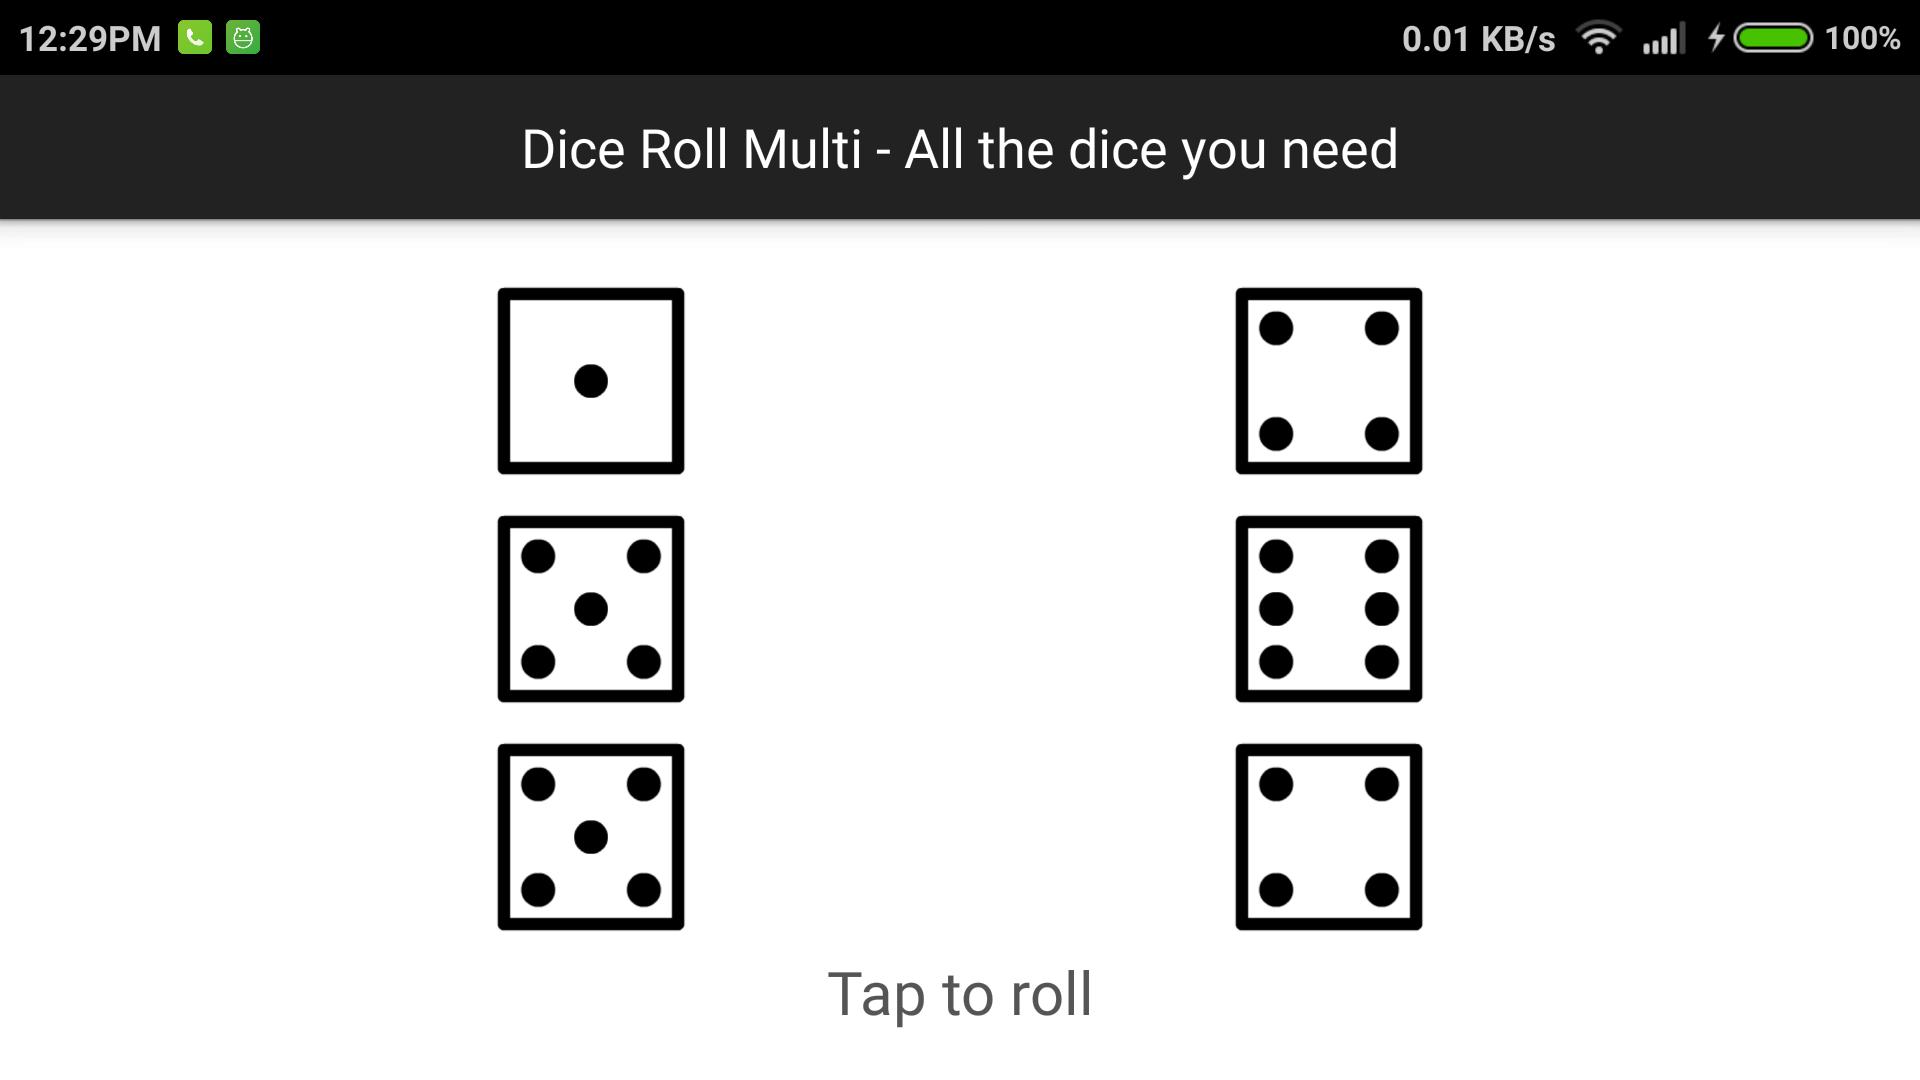 Dice and roll odetary. Roll the dice. Roll the dice game. Dice Roller. Dice Roll 20.